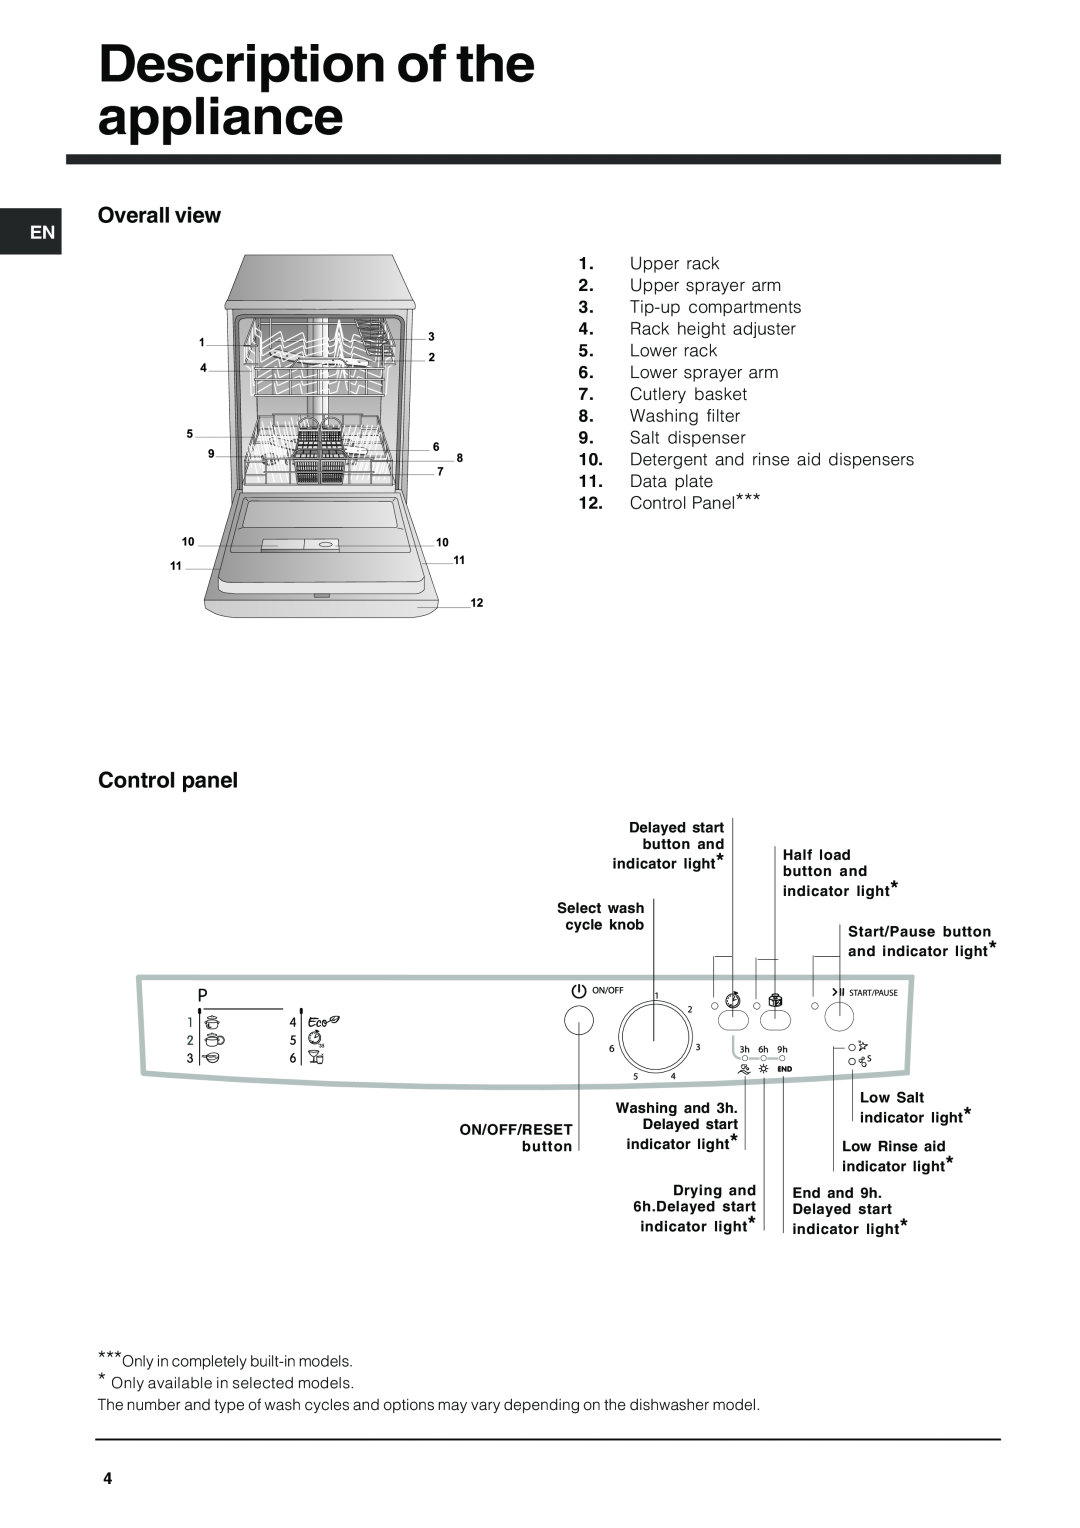 Indesit DFG 262 operating instructions Description of the appliance, Overall view, Control panel 